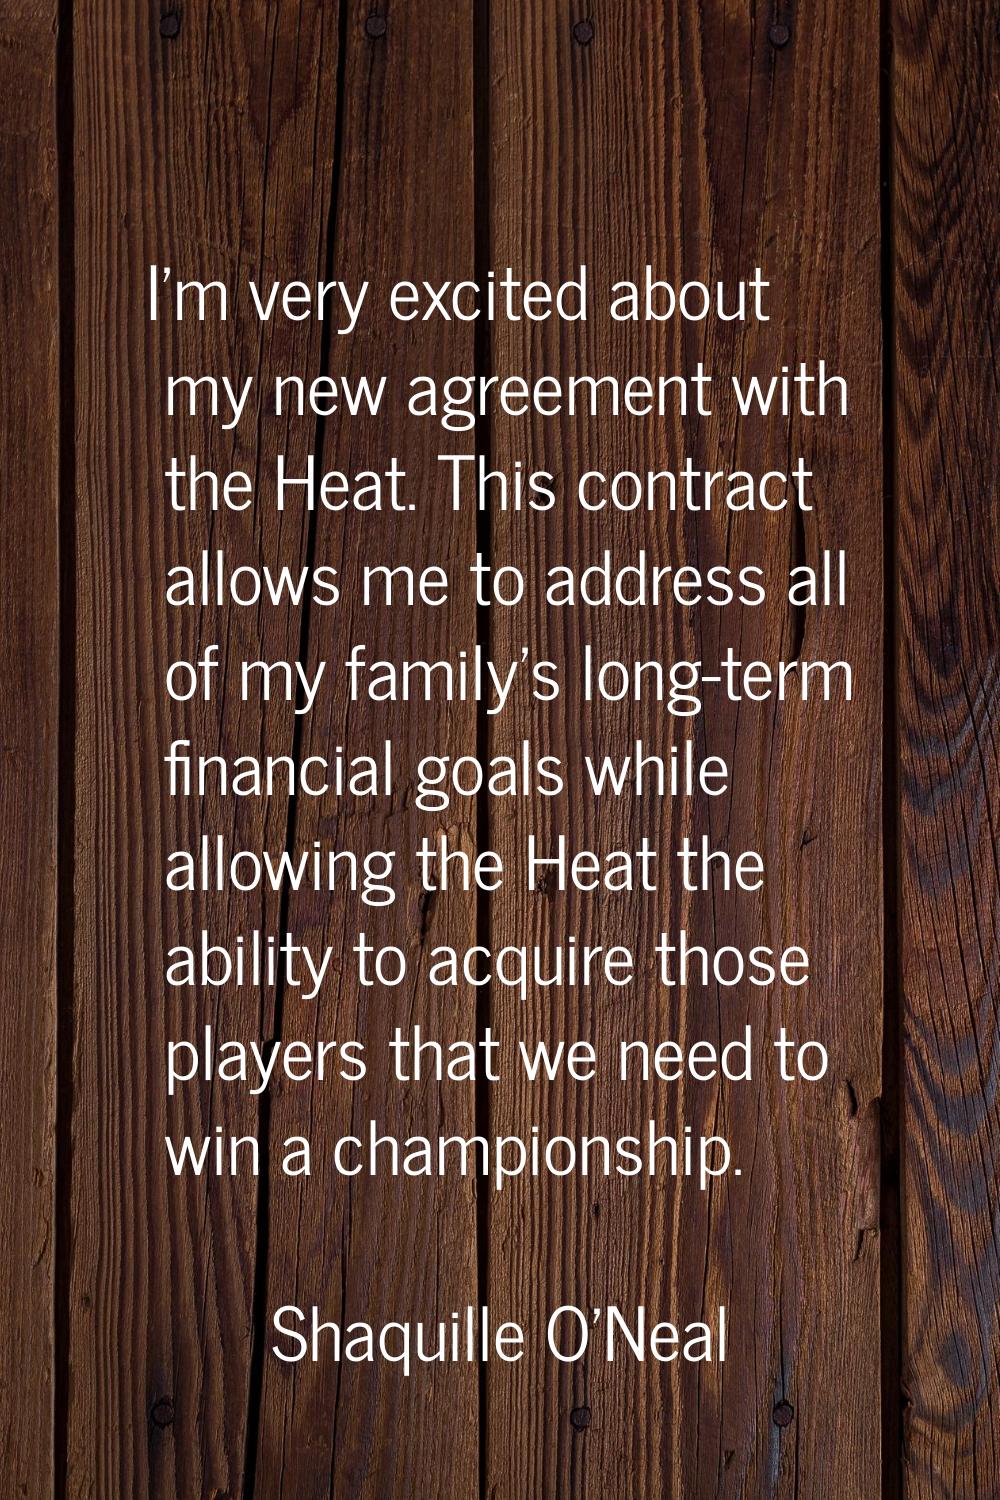 I'm very excited about my new agreement with the Heat. This contract allows me to address all of my